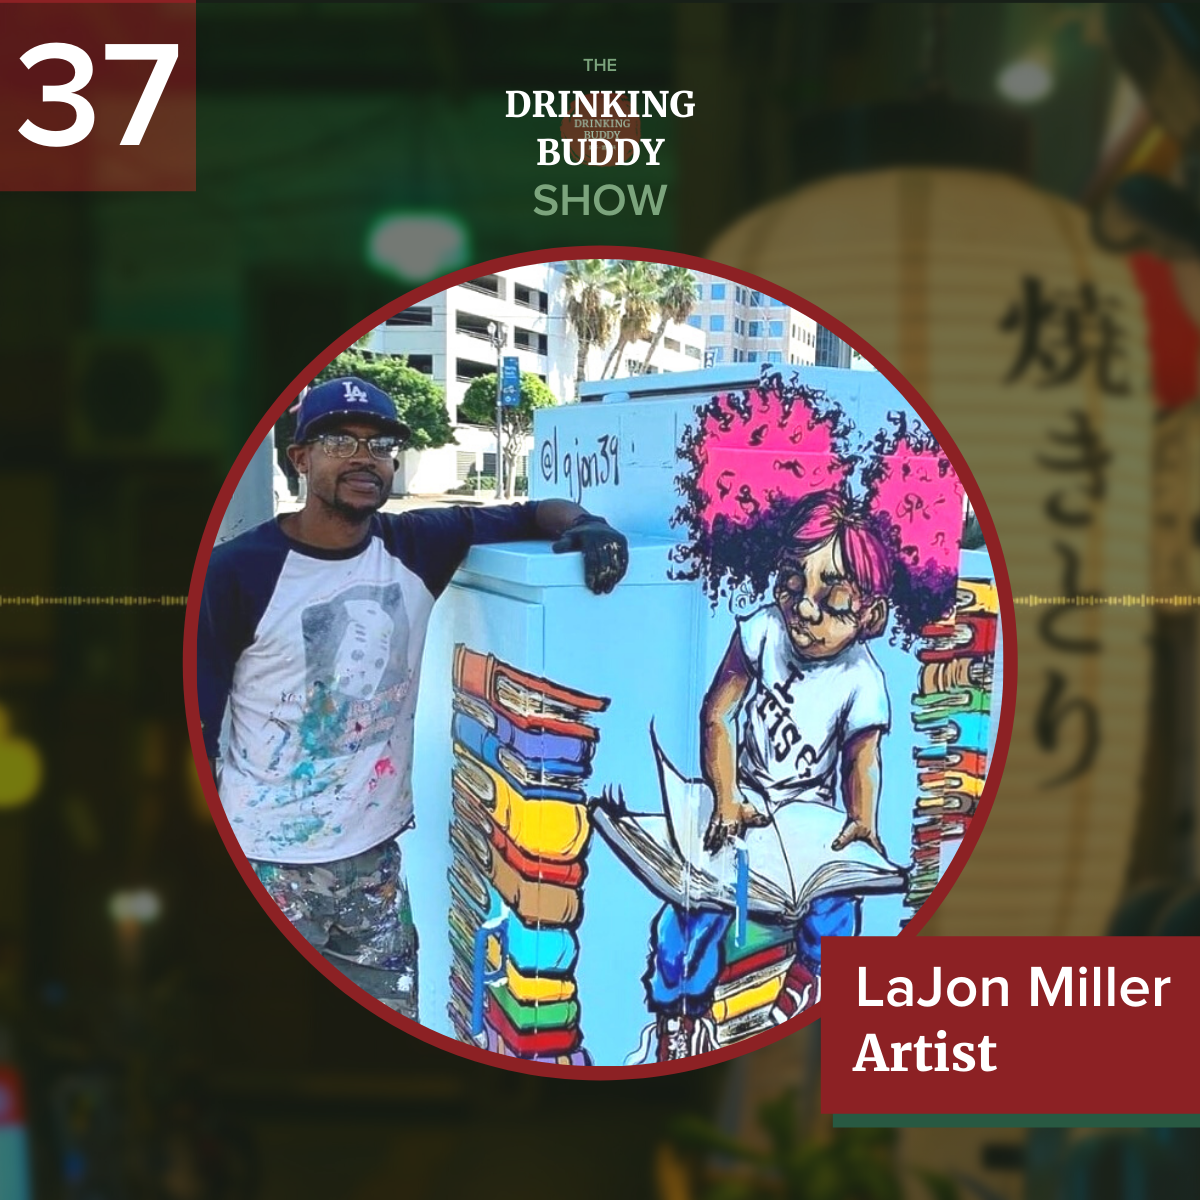 The Drinking Buddy Show Episode 37: Transforming Dreams and Talent into Viable Skills with Long Beach Artist LaJon Miller